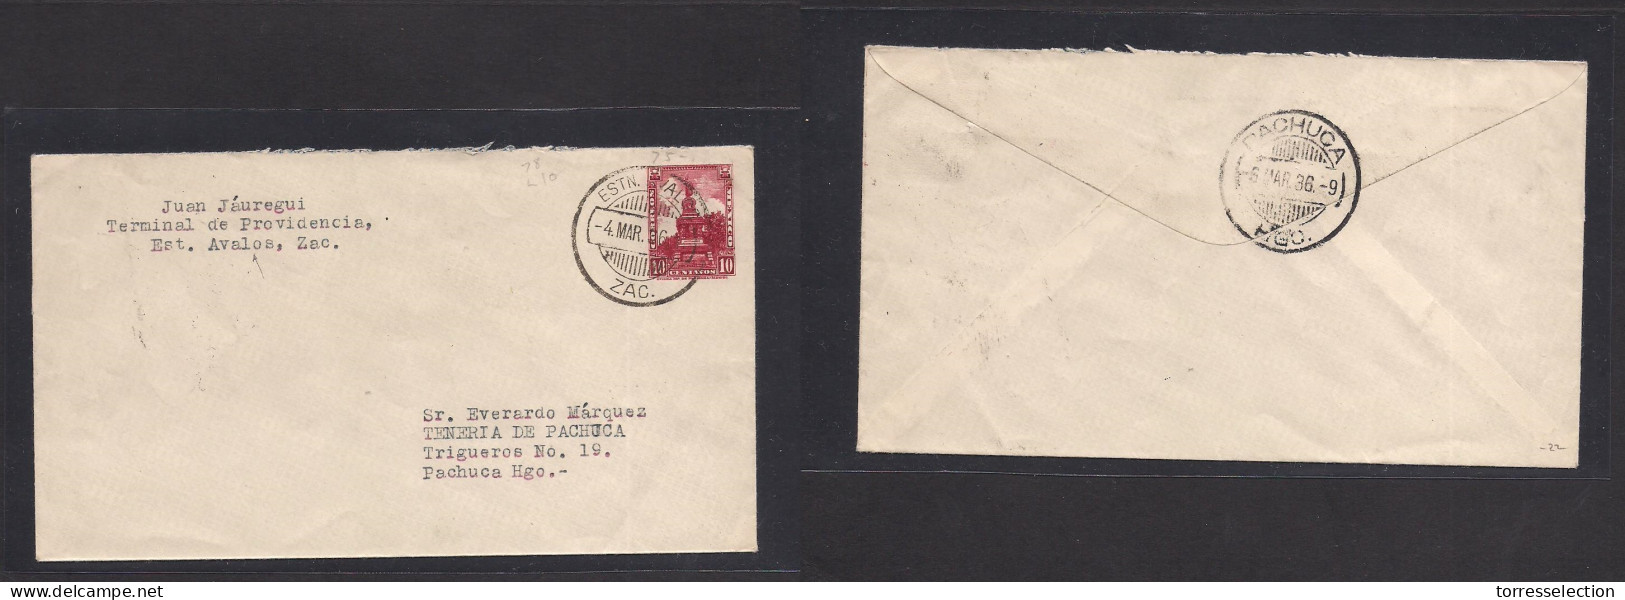 MEXICO - Stationery. 1936 (4 March) Est. Avalos, Zac - Pachuca 10c Red Stat Env. Fine Used. XSALE. - Mexico